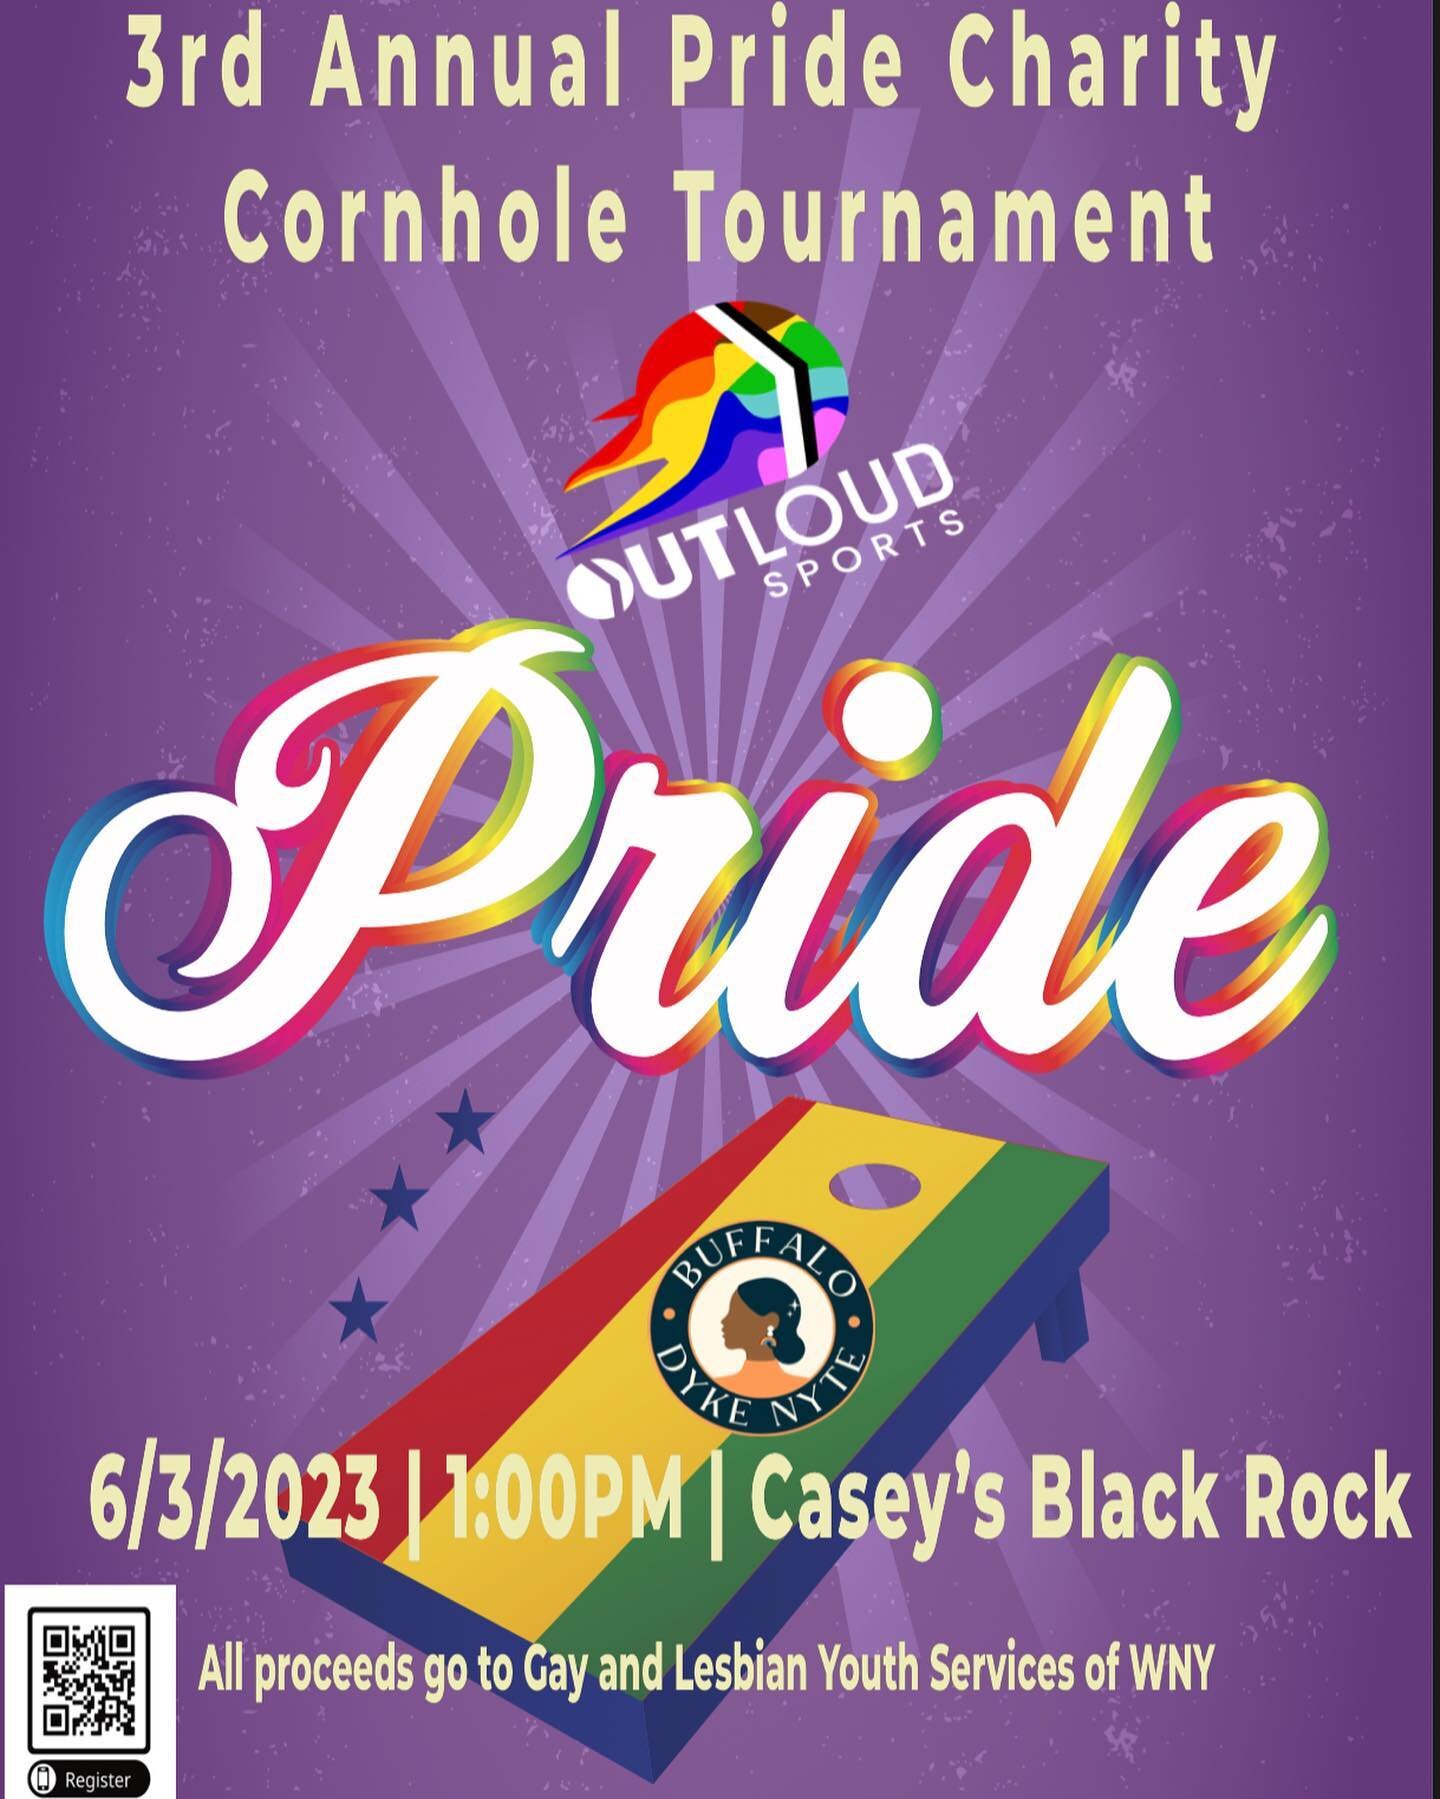 3rd annal pride charity cornhole tournament will be June 3rd at 1:00PM @caseysblackrock! DJ Jam and @dykenytebuffalo will also be partnering this year. All proceeds go to @glys_wny.  Early bird registration ends April 12th. Register now for $5 off pe